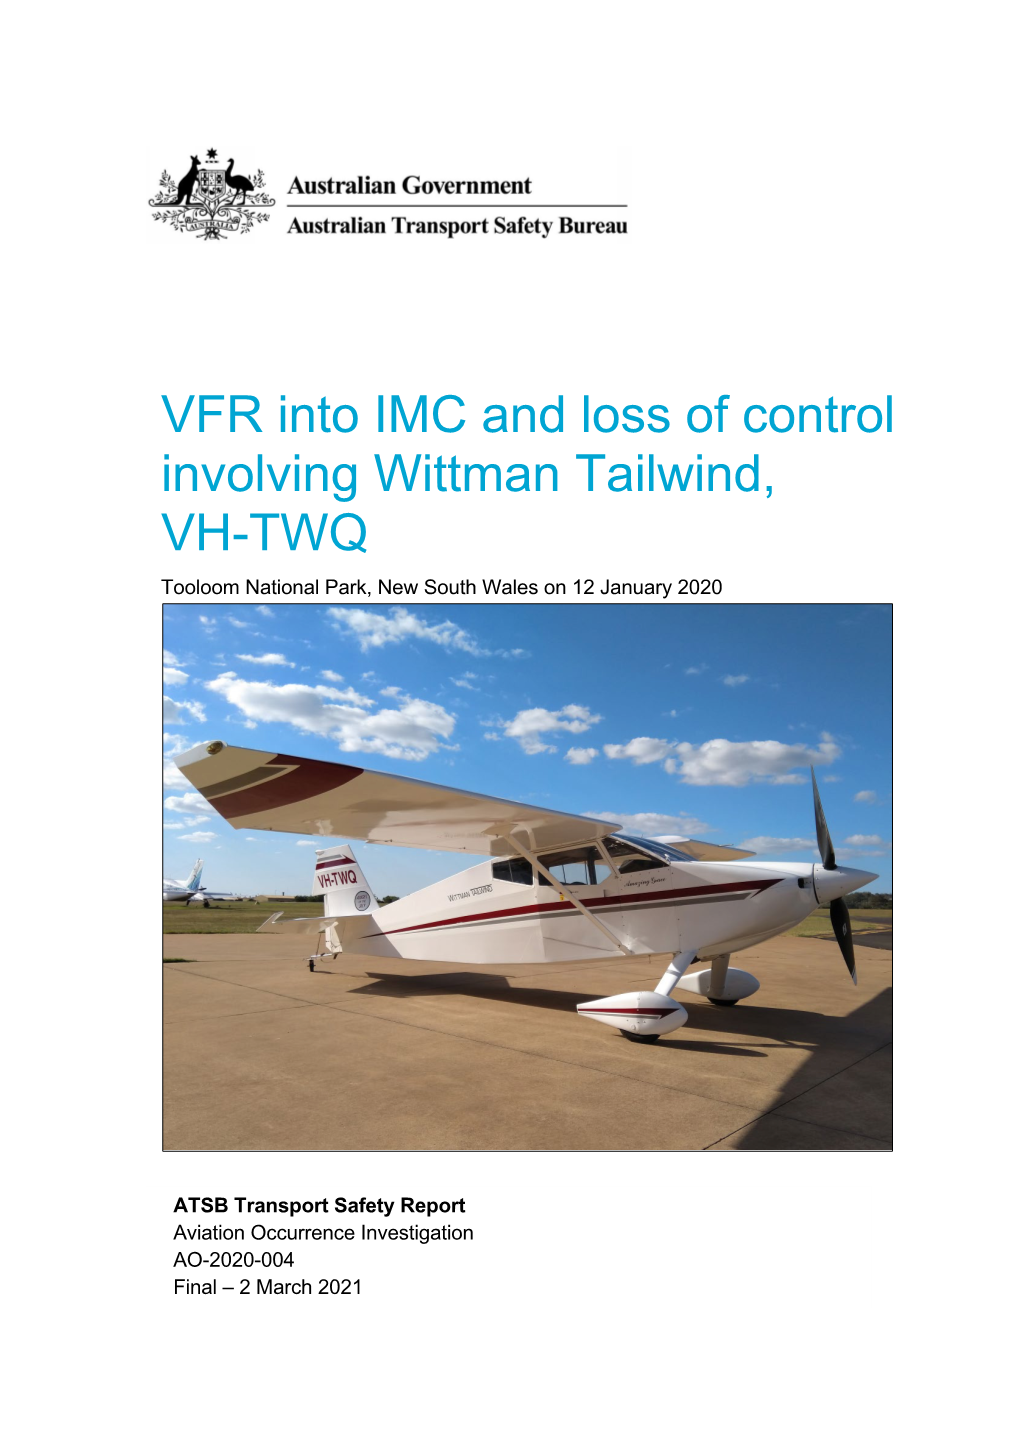 VFR Into IMC and Loss of Control Involving Wittman Tailwind, VH-TWQ Tooloom National Park, New South Wales on 12 January 2020